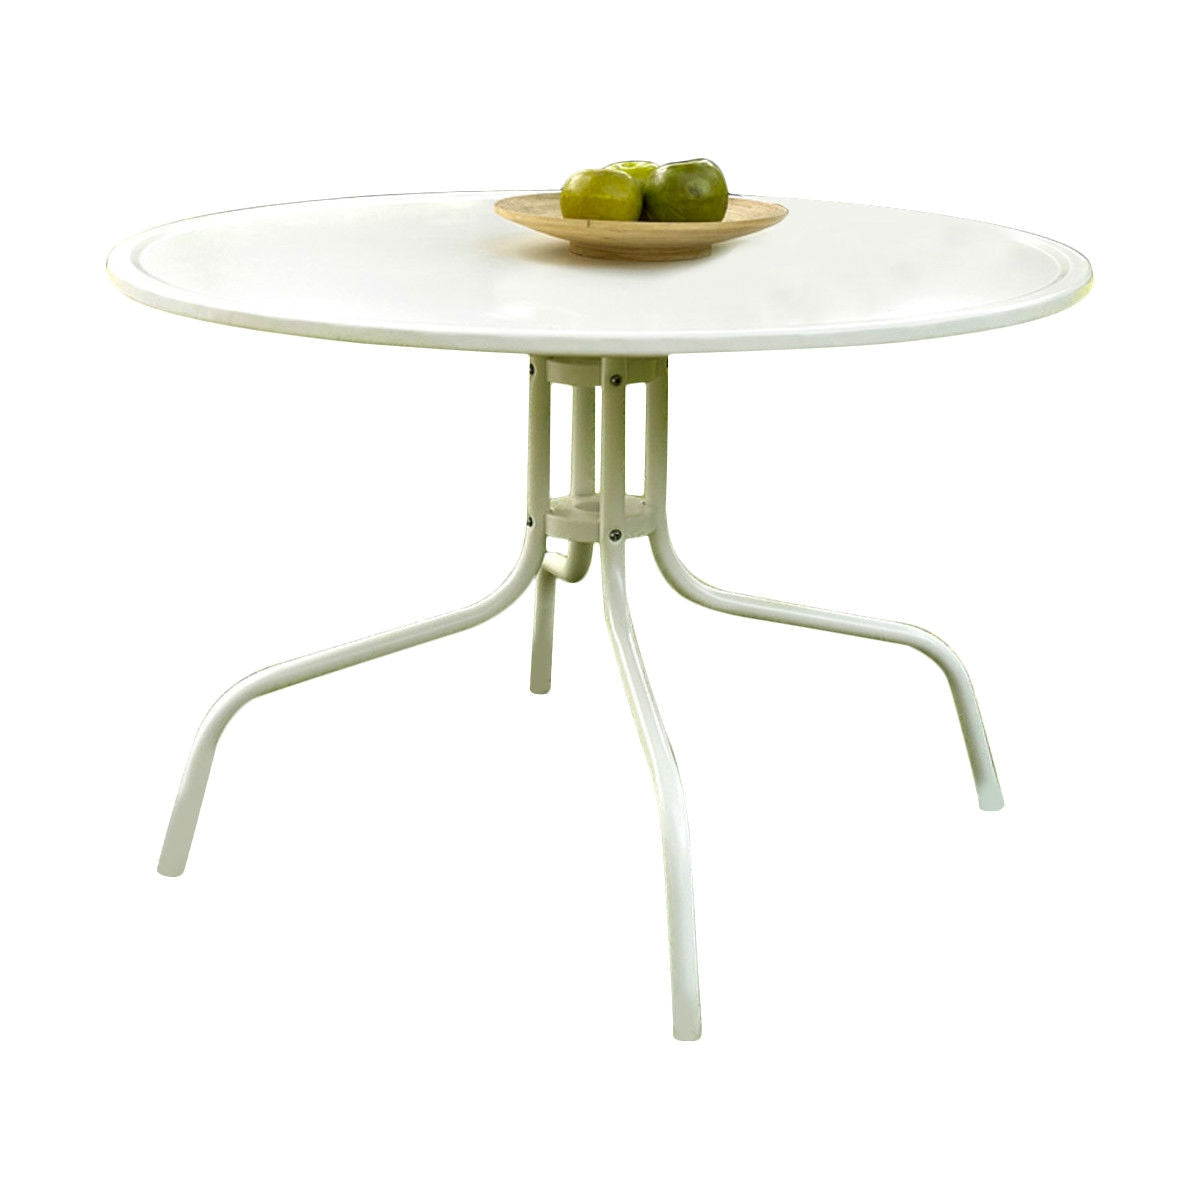 Outdoor > Outdoor Furniture > Patio Tables - Round Patio Dining Table In White Outdoor UV Resistant Metal